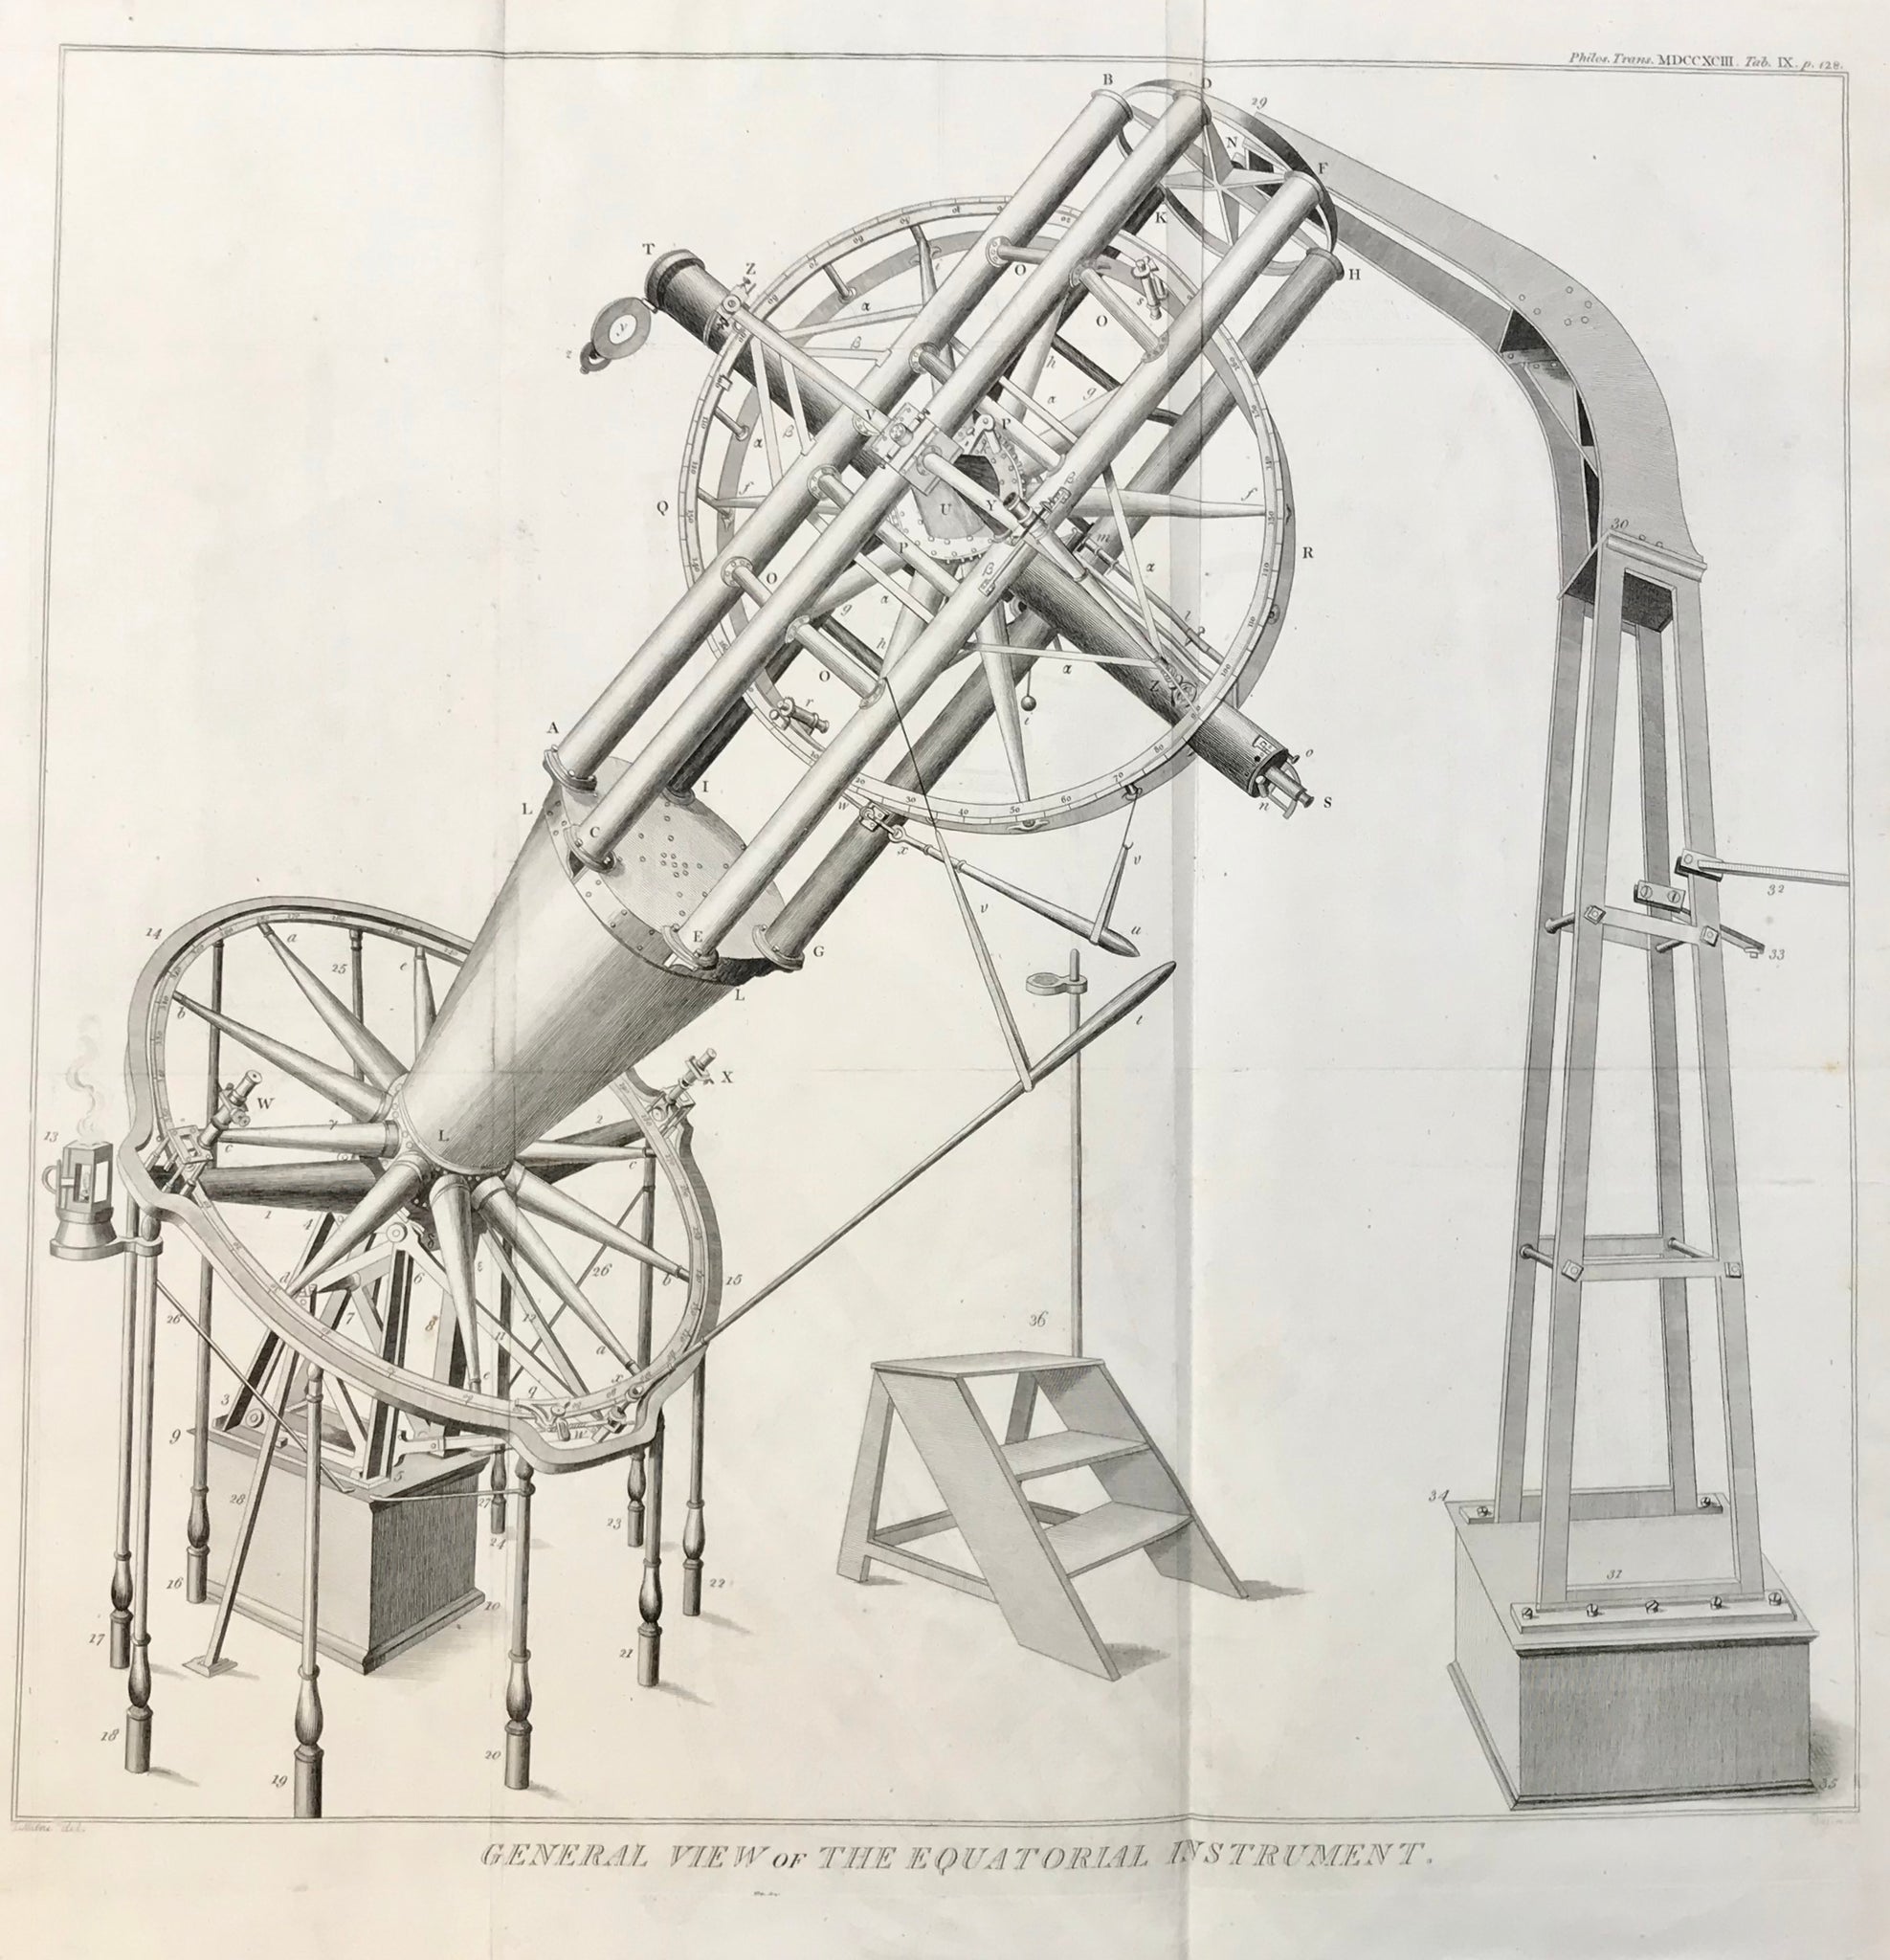 Astronomical Instruments Equatorial Instrument made by Ramsden for Sir Geo. Shuckburgh.  Copper engraving by Sid. Hall after J. Farey, dated 1820. Light browning of margin edges.  